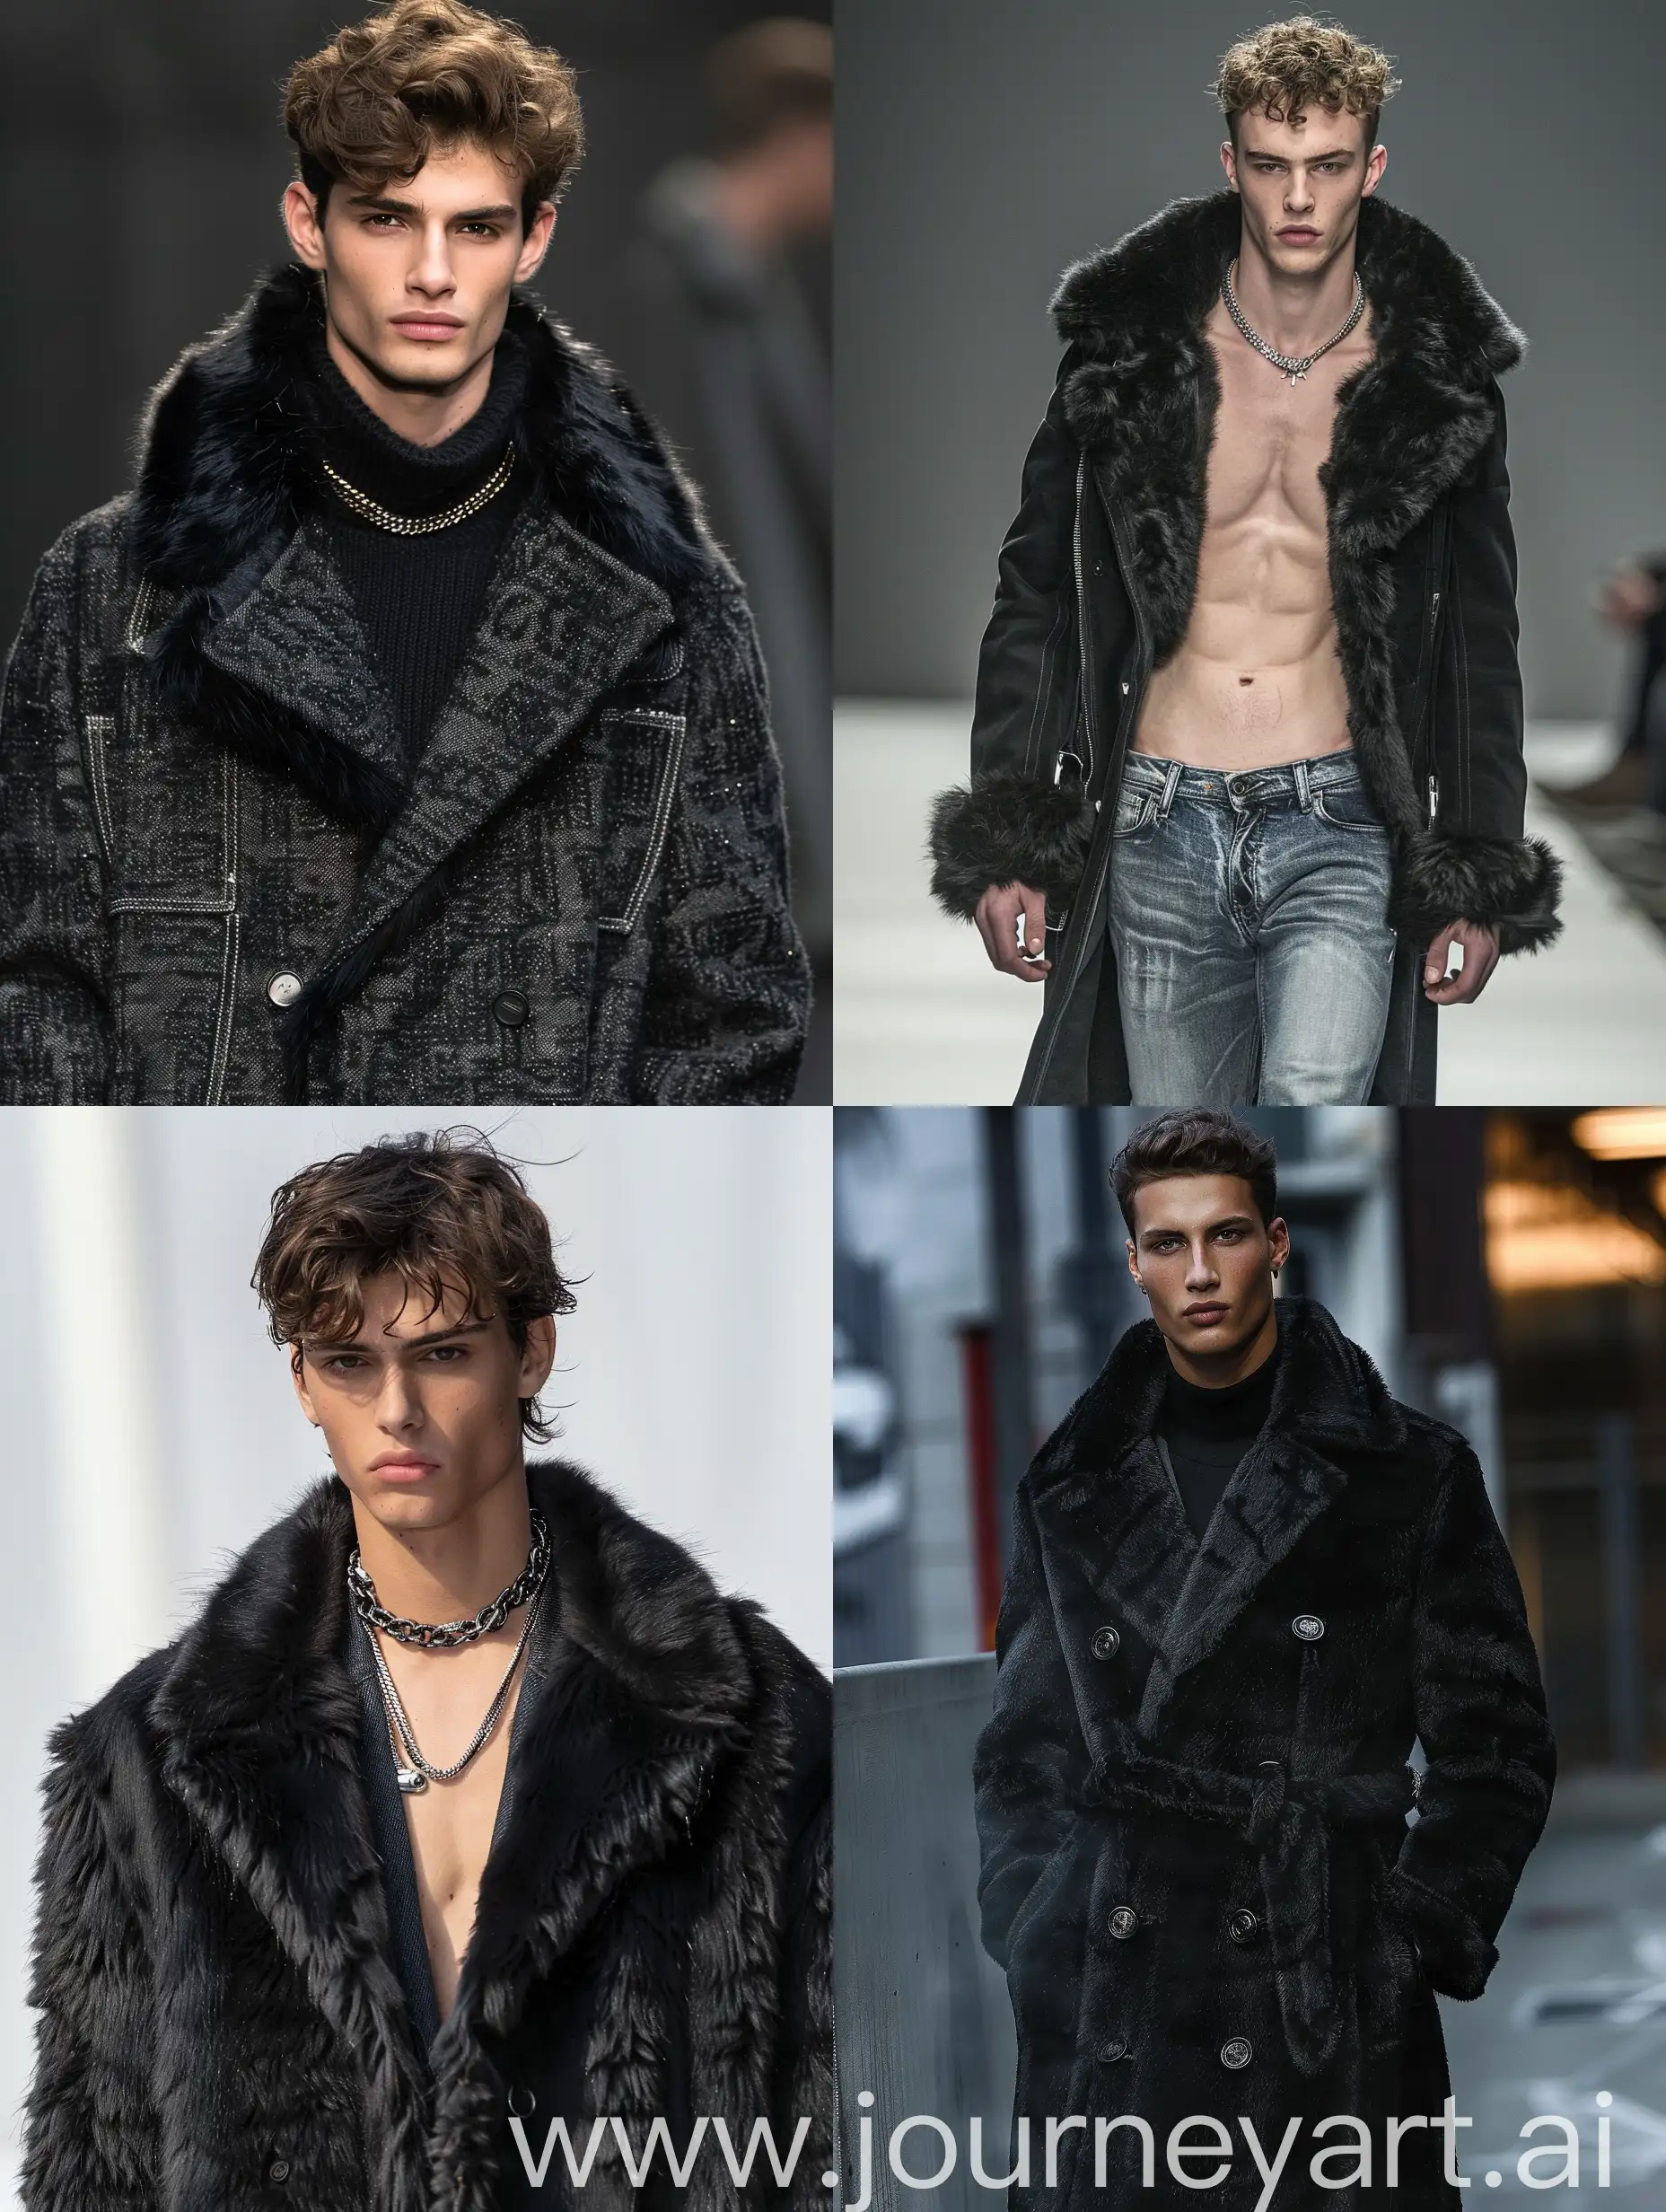 Fashionable-Male-Model-Showcasing-Slim-Runway-Jeans-Coats-and-Luxurious-Jewelry-in-Silver-and-Gold